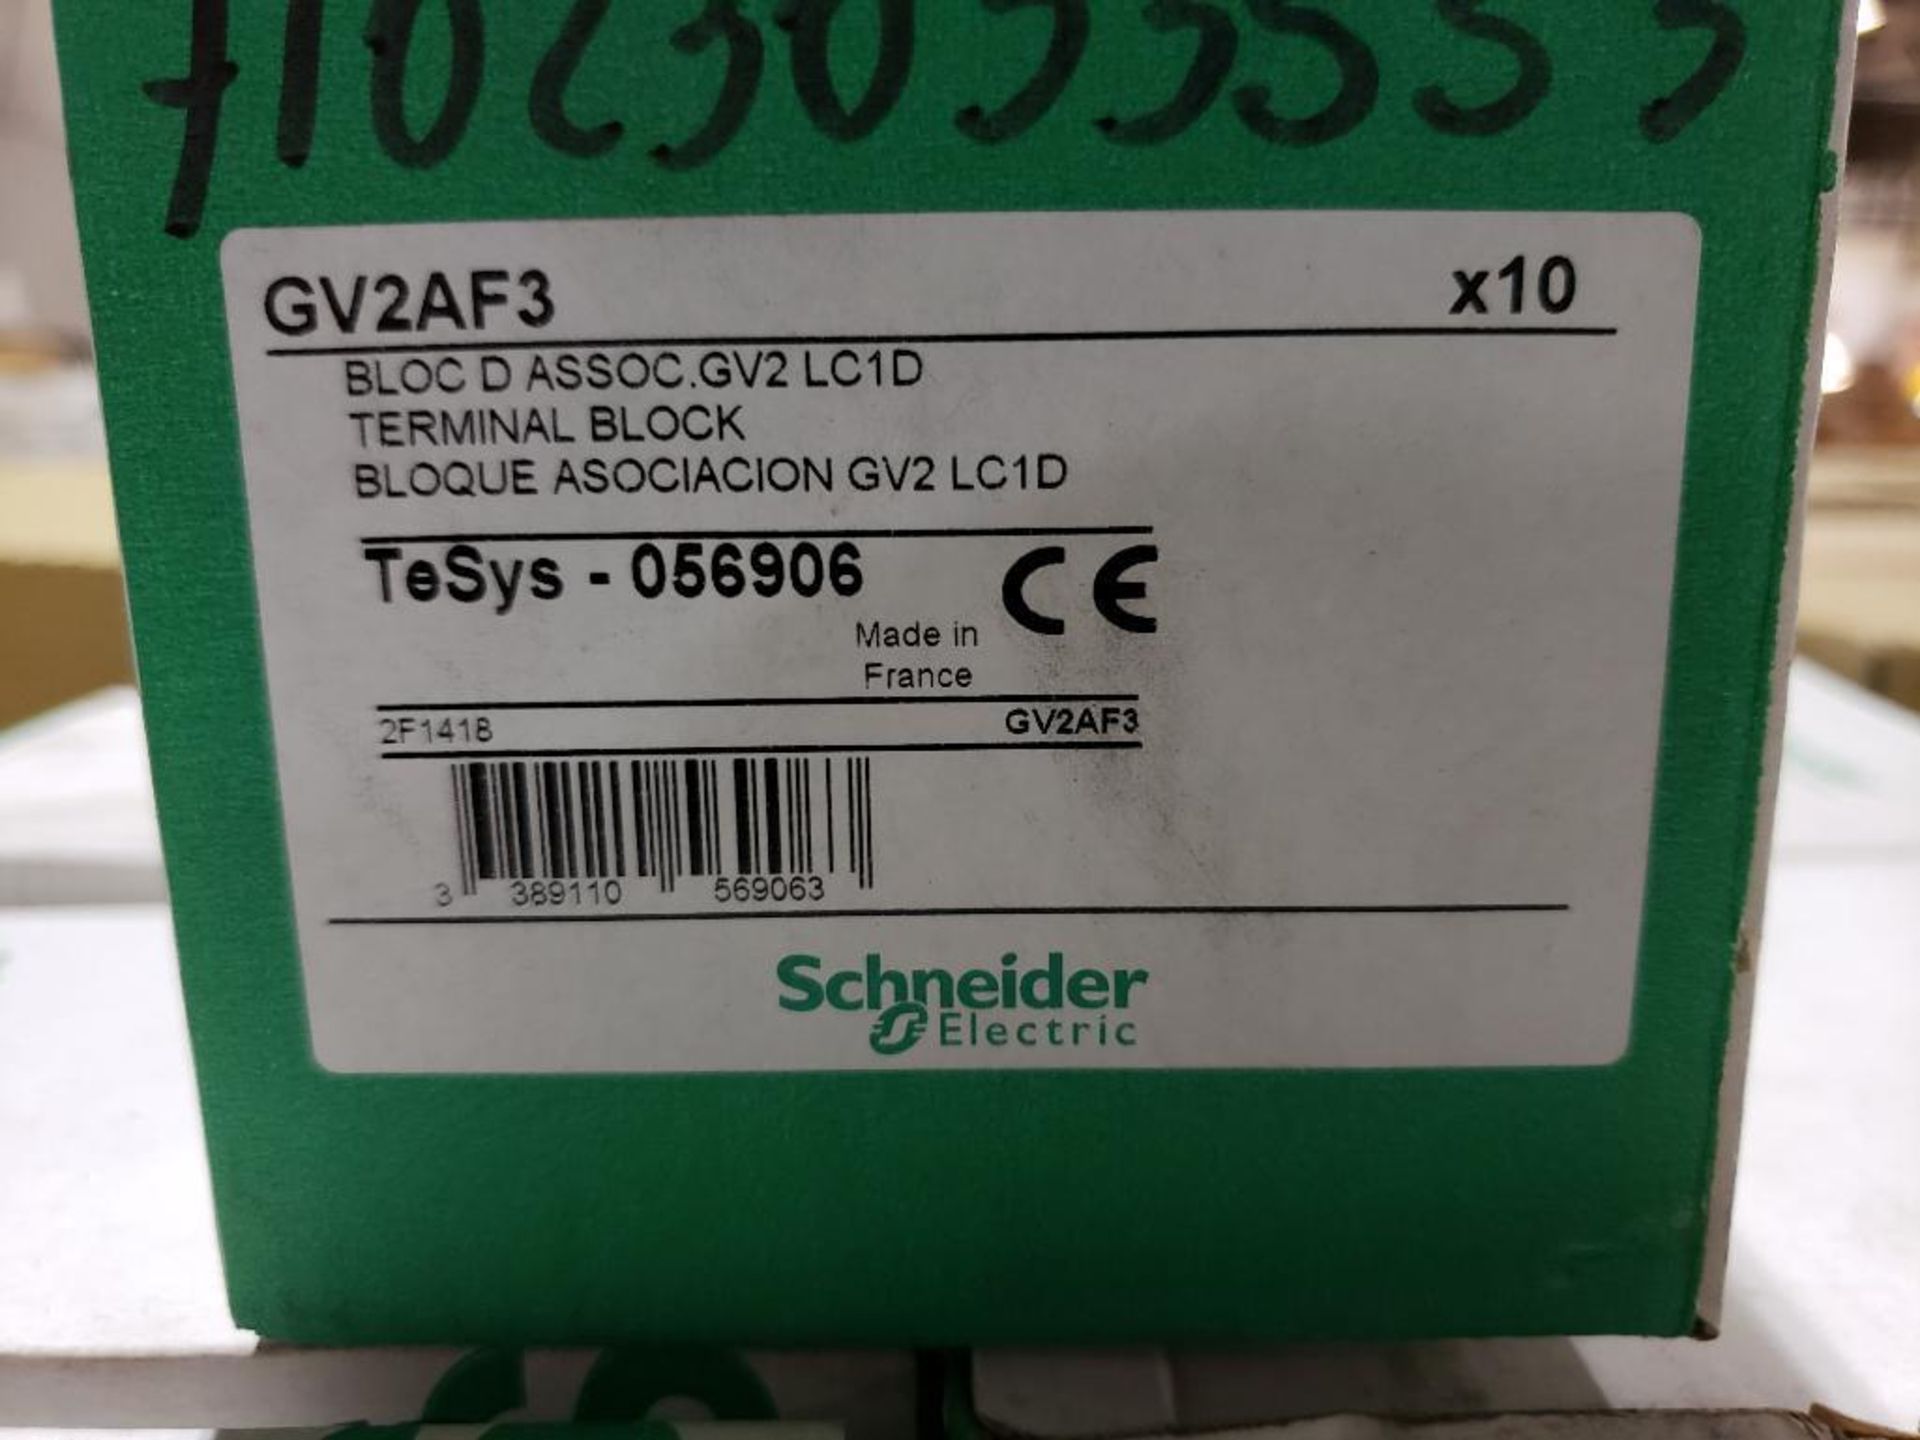 Qty 300 - Schneider Electtric terminal block. Part number GV2AF3. New in bulk boxes. - Image 2 of 3